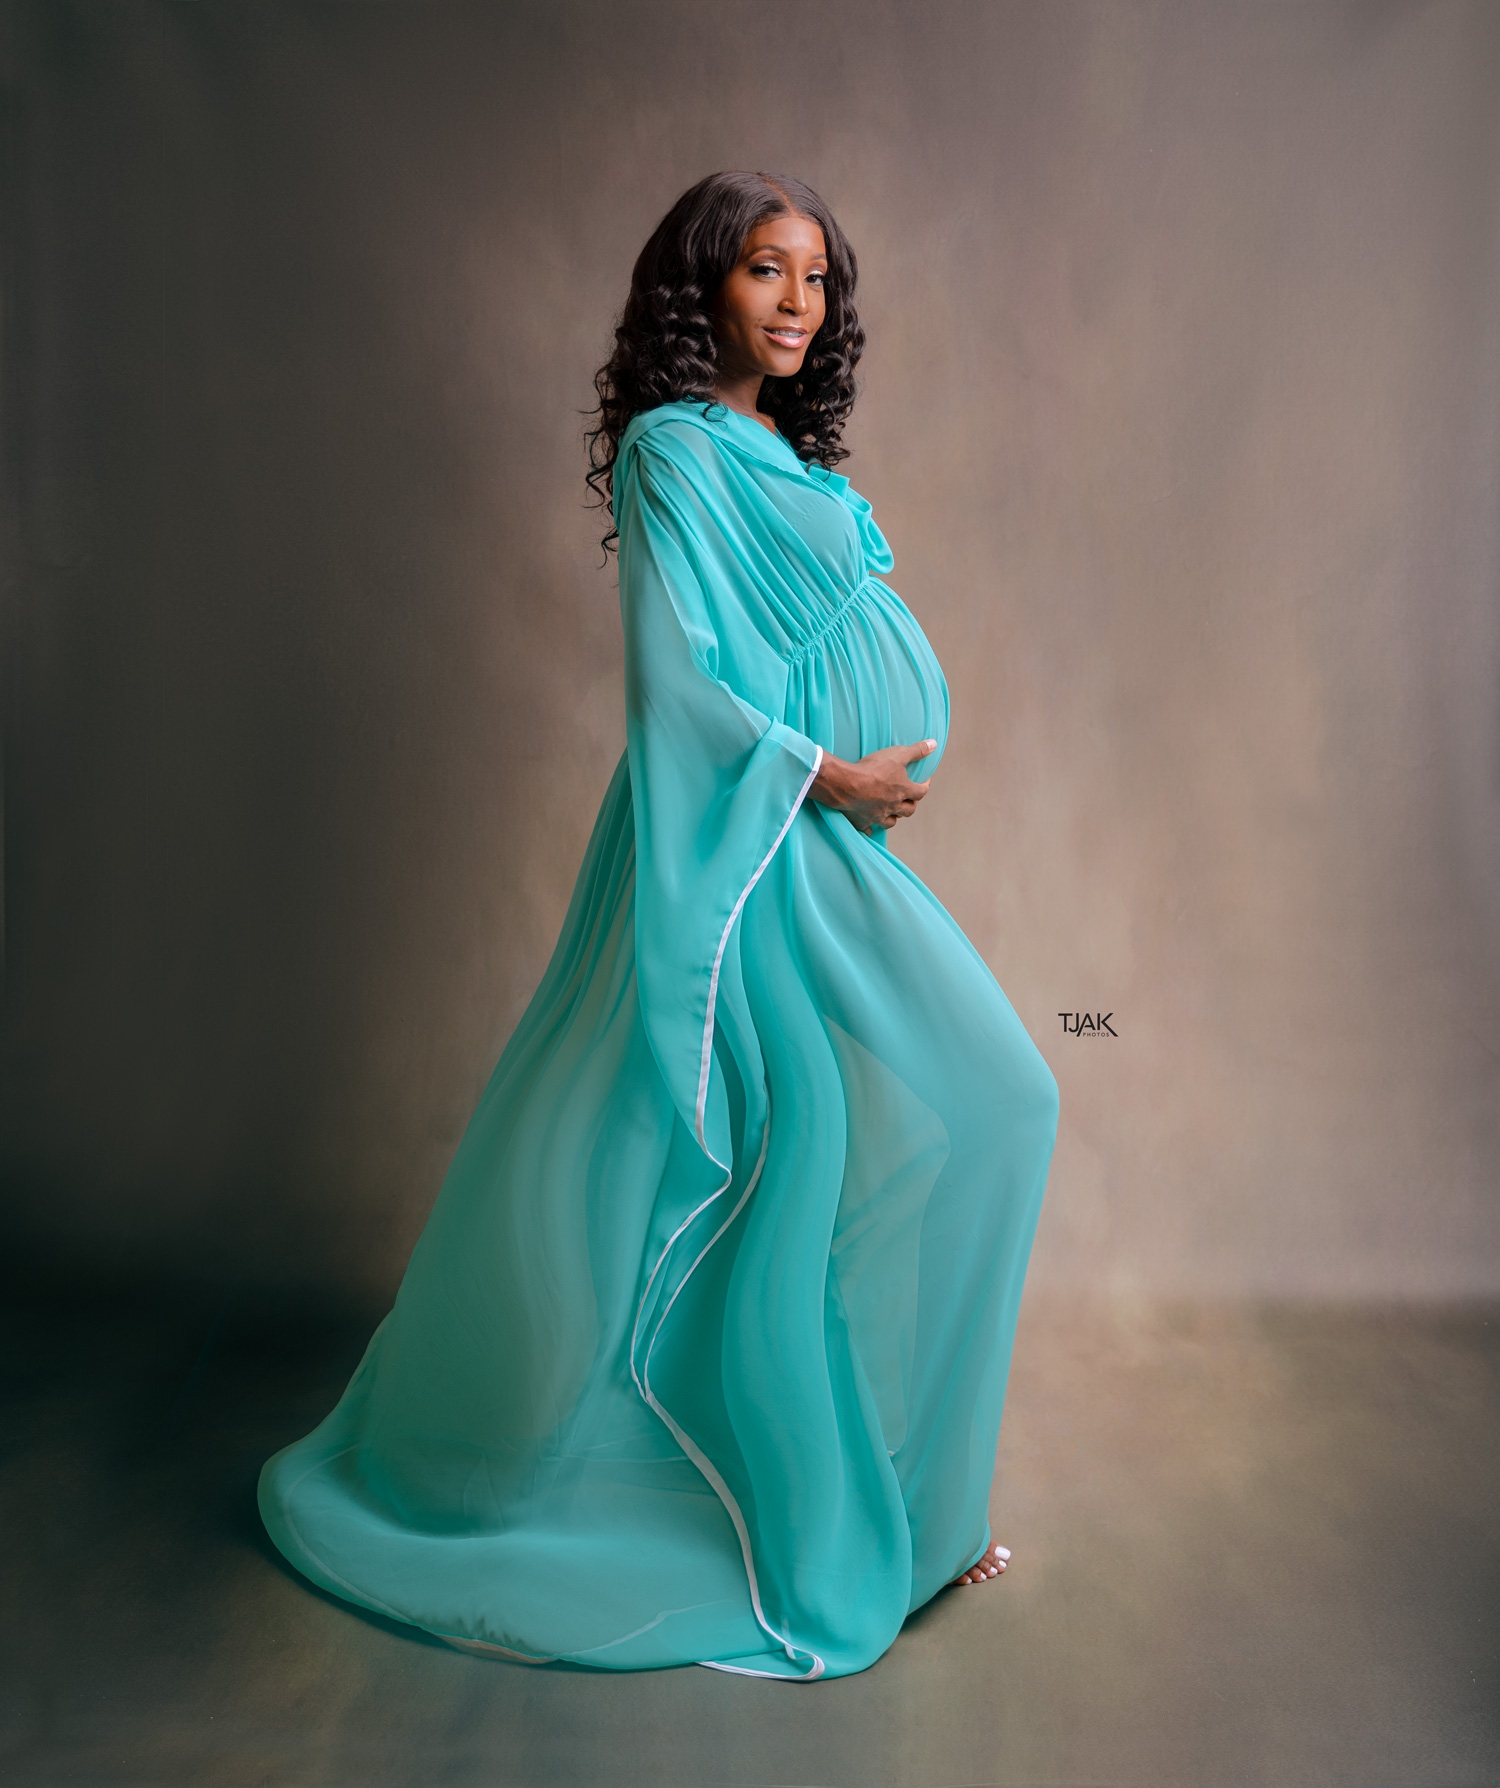 classic maternity photoshoot of a woman wearing turquoise pregnancy dress in a studio in Laurel MD near Baltimore MD in Howard County